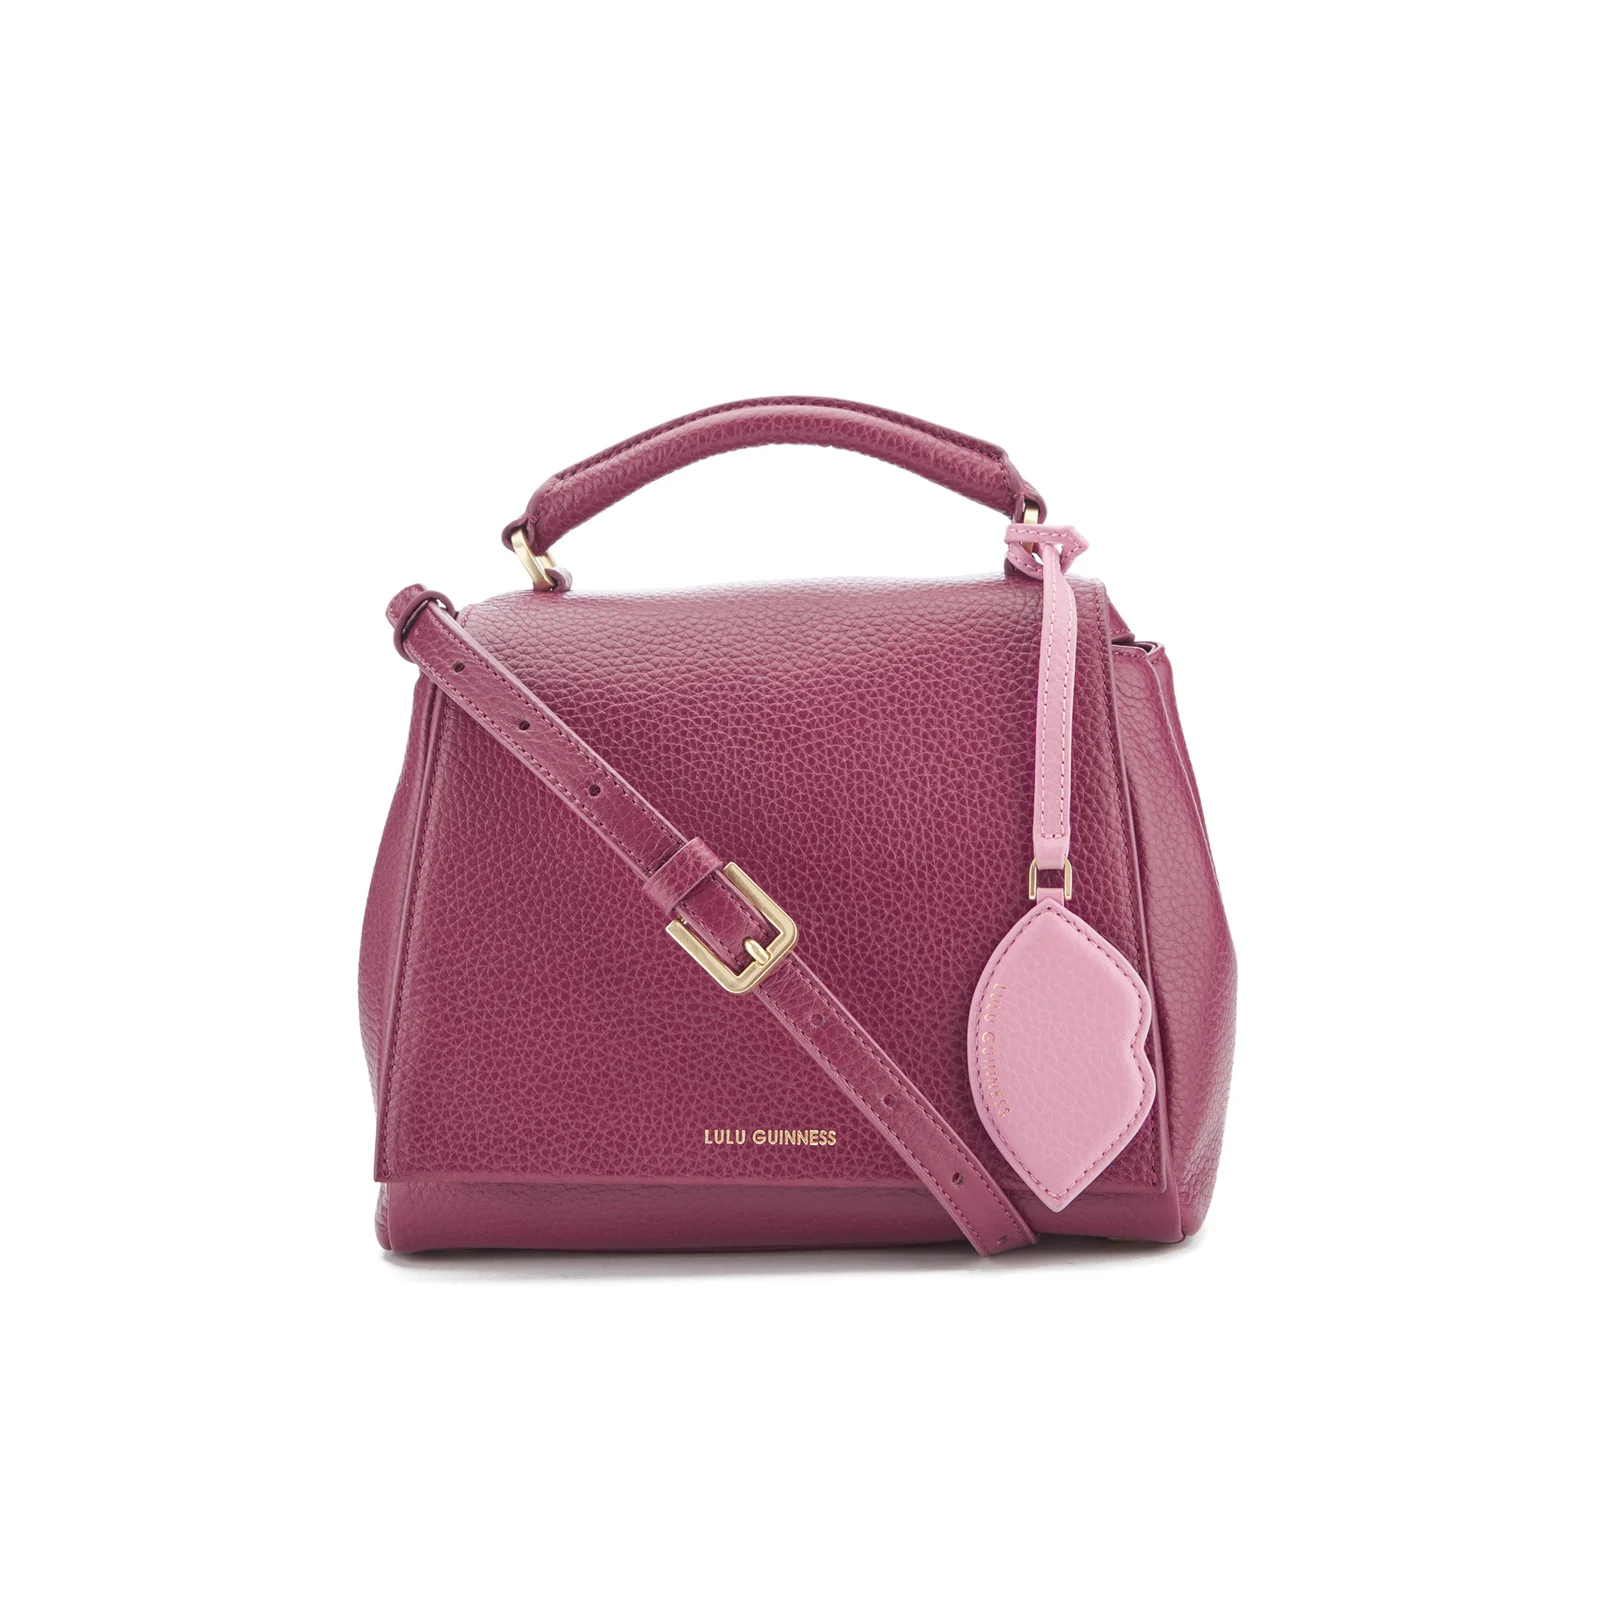 Lulu Guinness Women's Rita Small Shoulder Bag with Lip Charm - Cassis Image 1